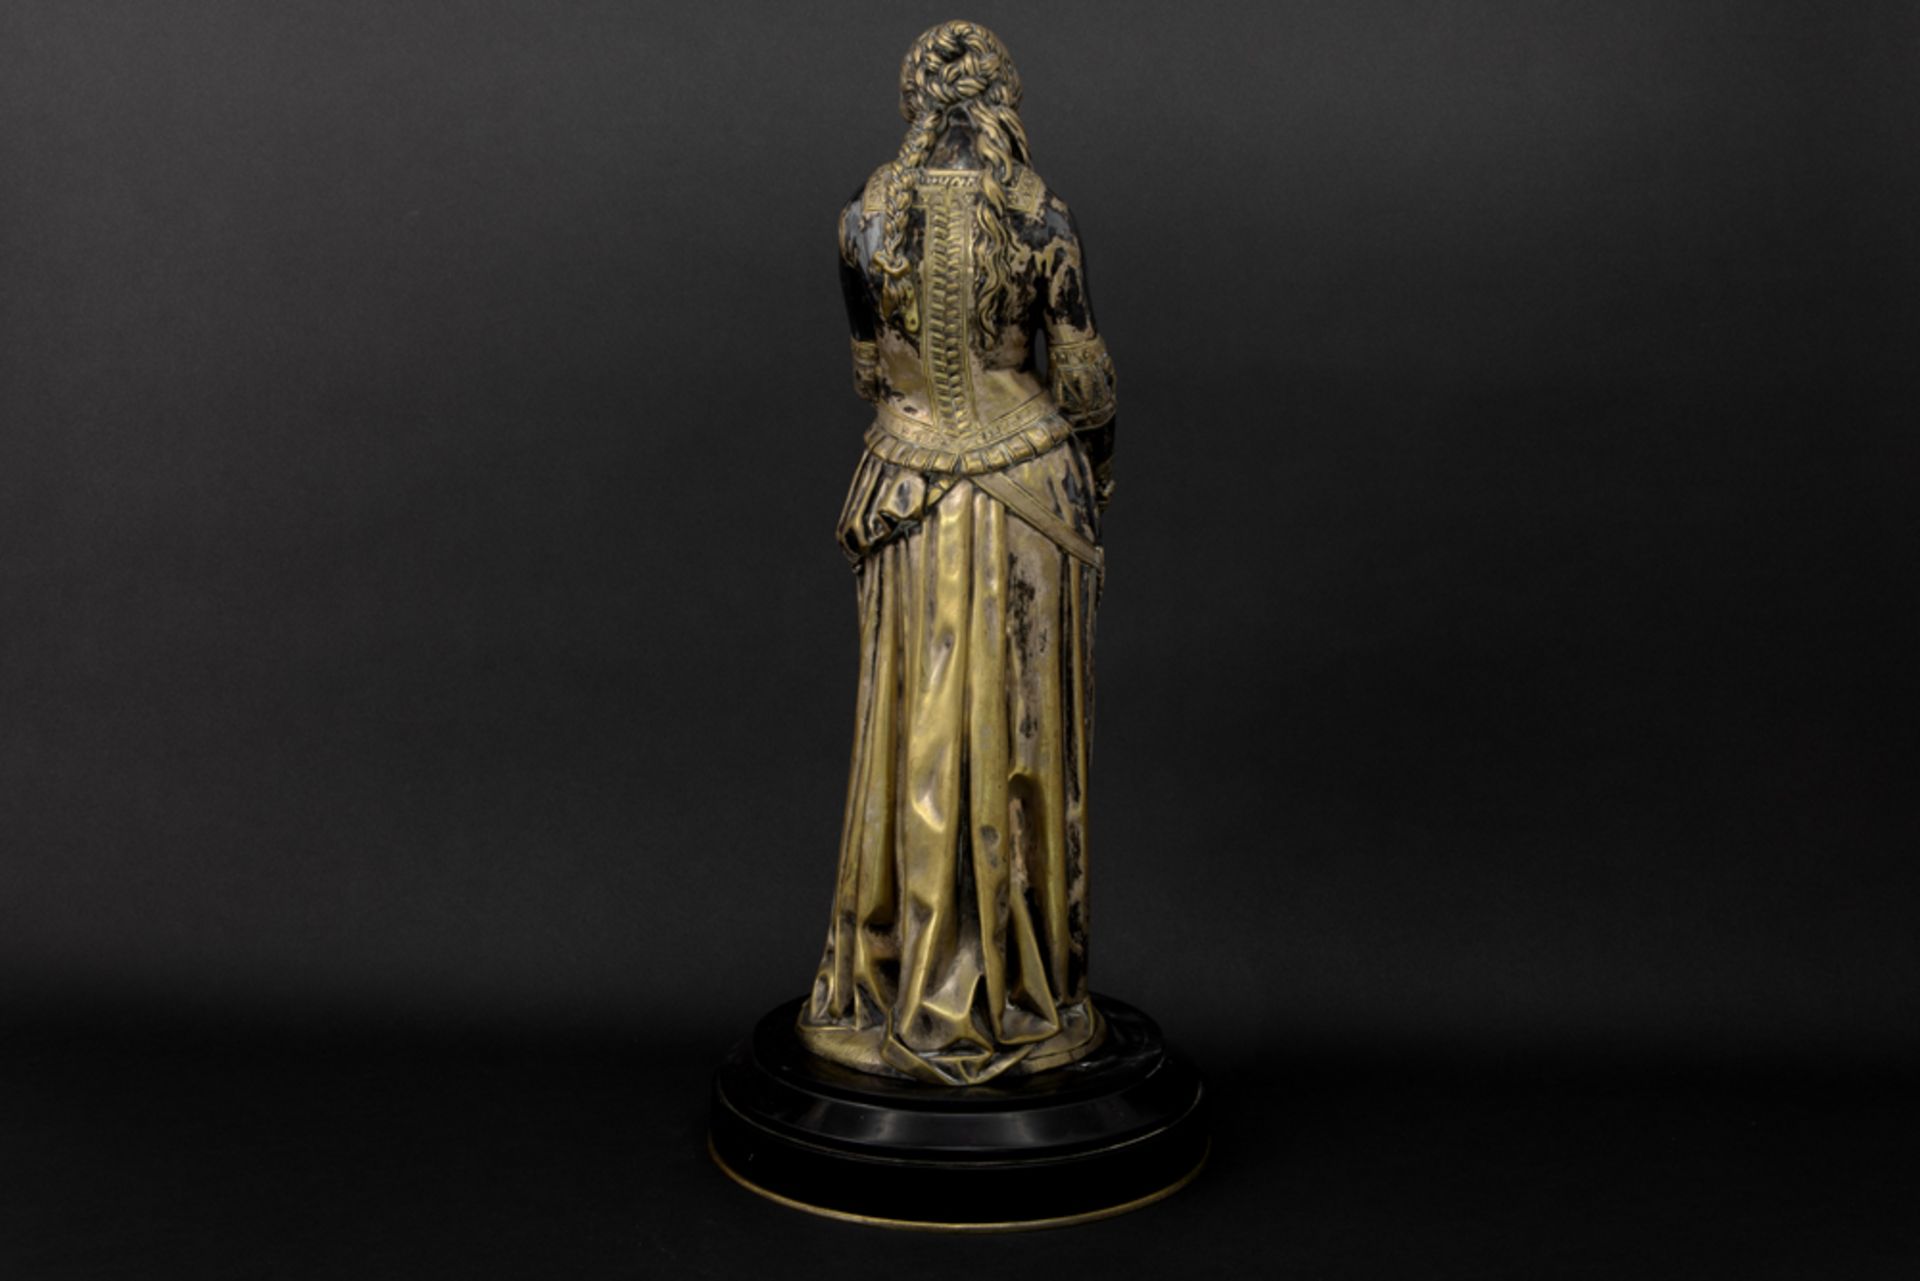 antique French sculpture in silver- and goldplated bronze - signed Emile André Boisseau and dated - Image 3 of 4